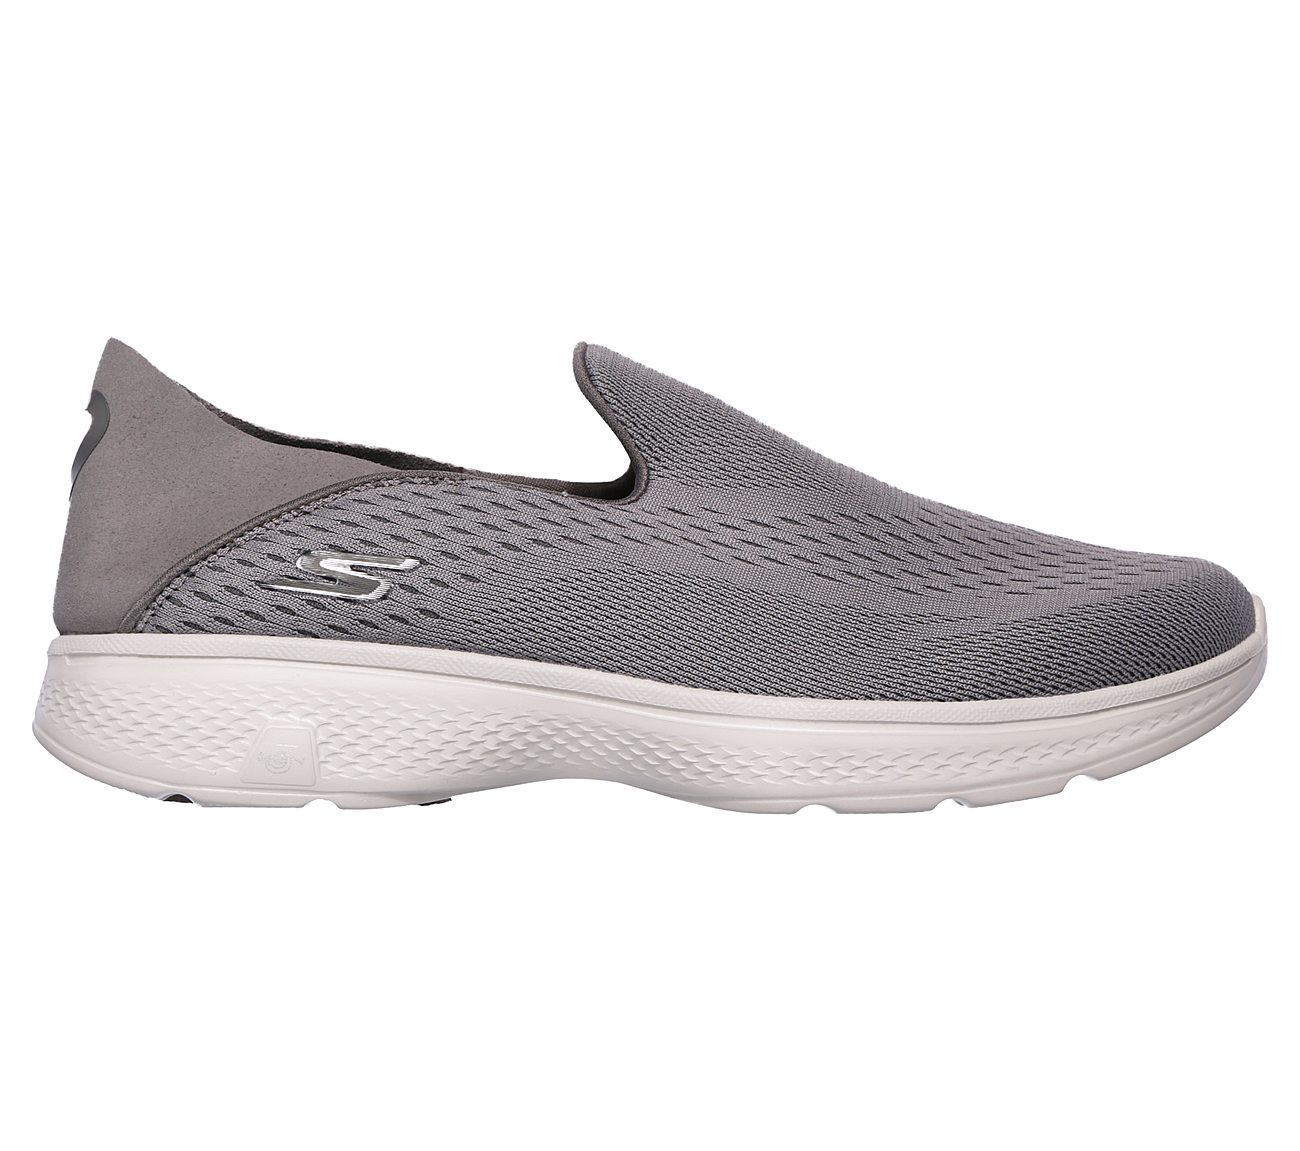 GO WALK 4- CONVERTIBLE, CCHARCOAL Footwear Right View